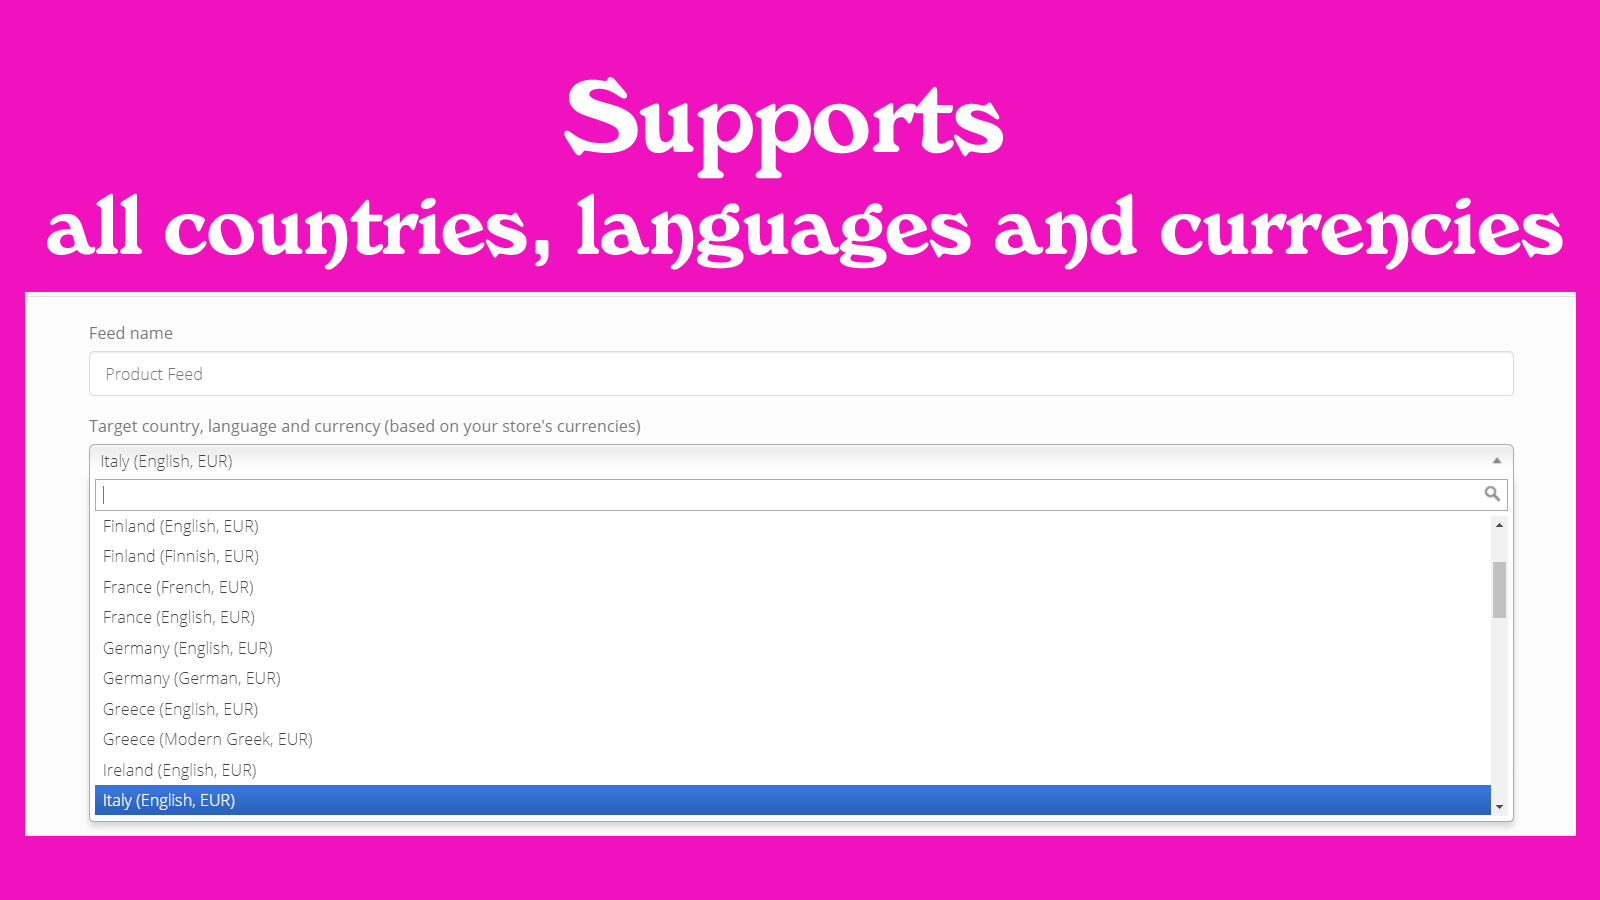 Supports all countries, languages and currencies